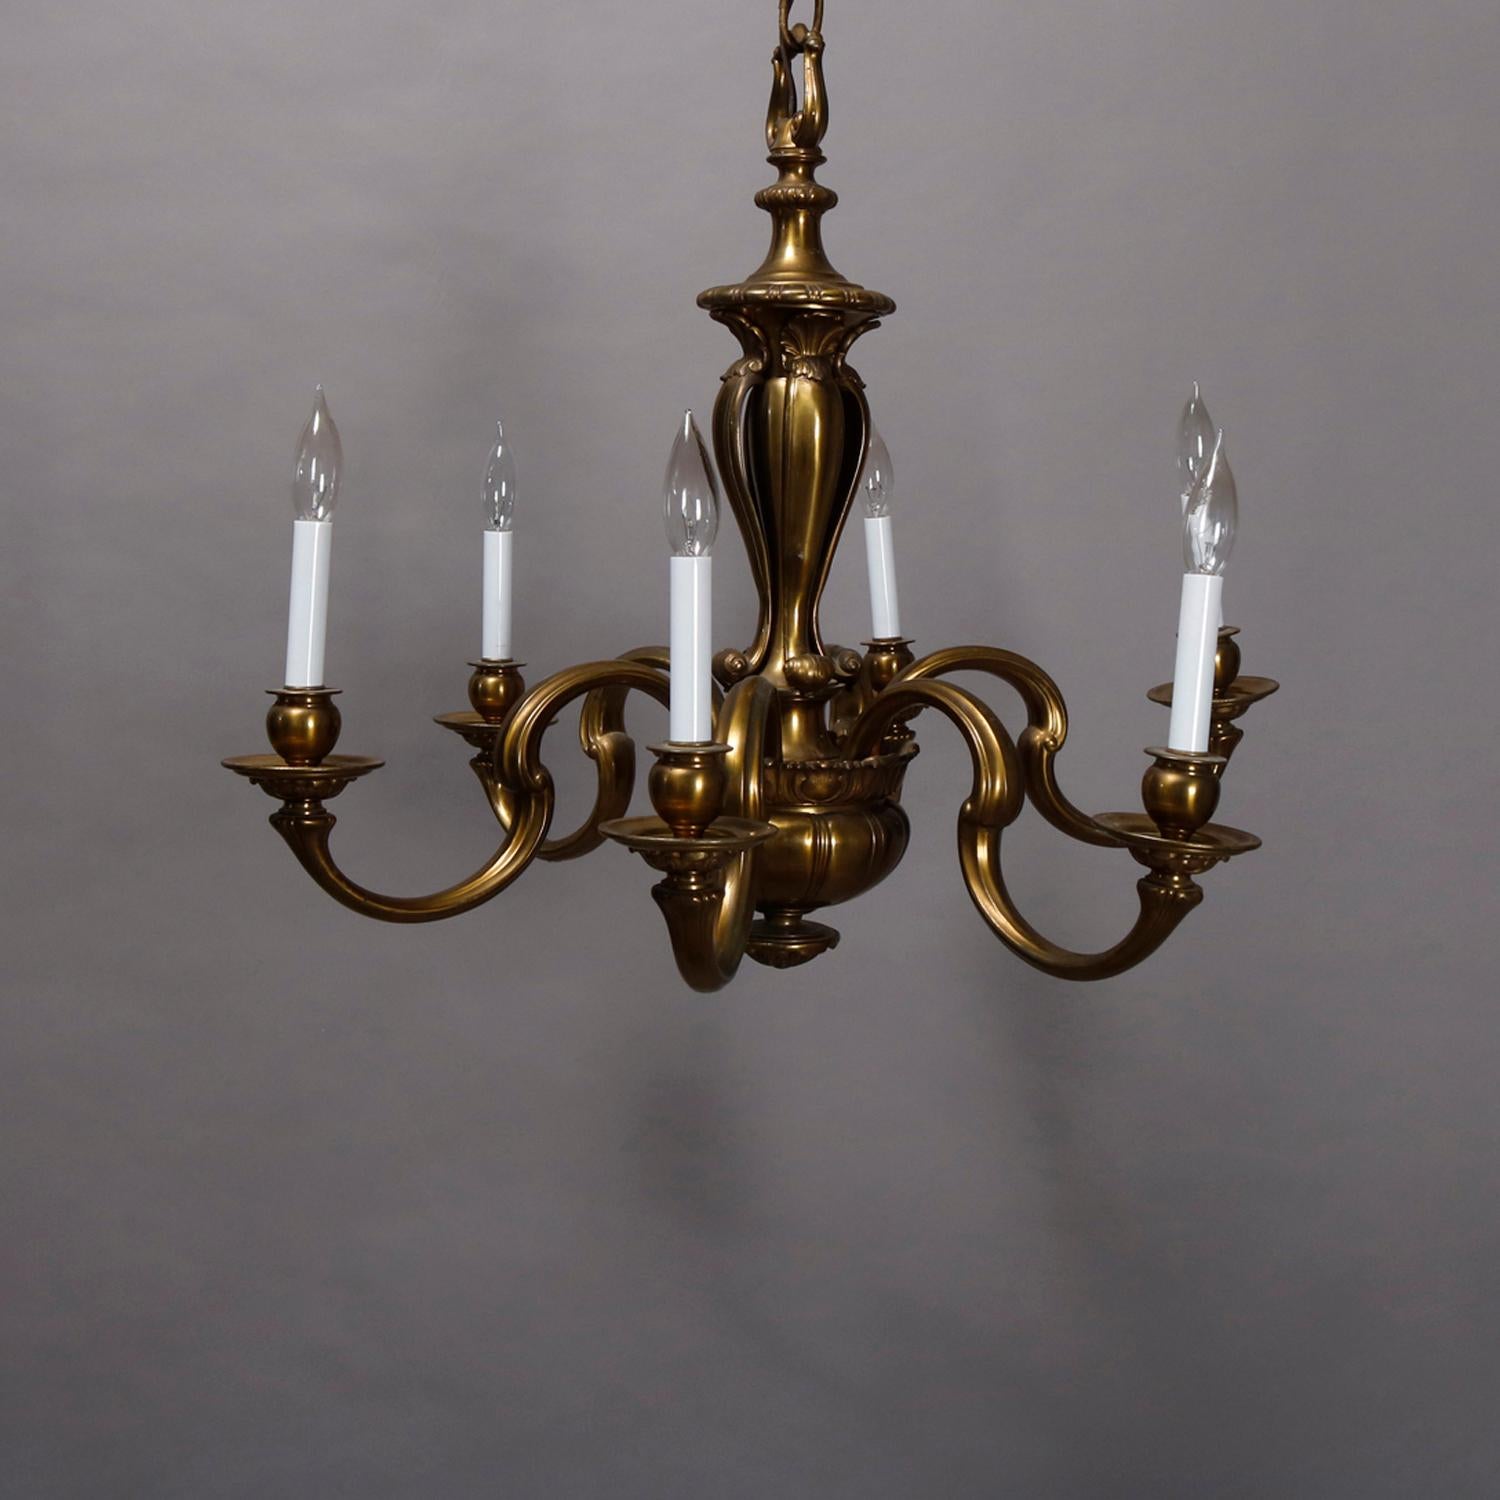 A vintage and large French Empire style chandelier offers bronze frame with urn form column having six S-scroll arms terminating in candle lights and surmounting melon form drop finial, circa 1940.

Measures- 27